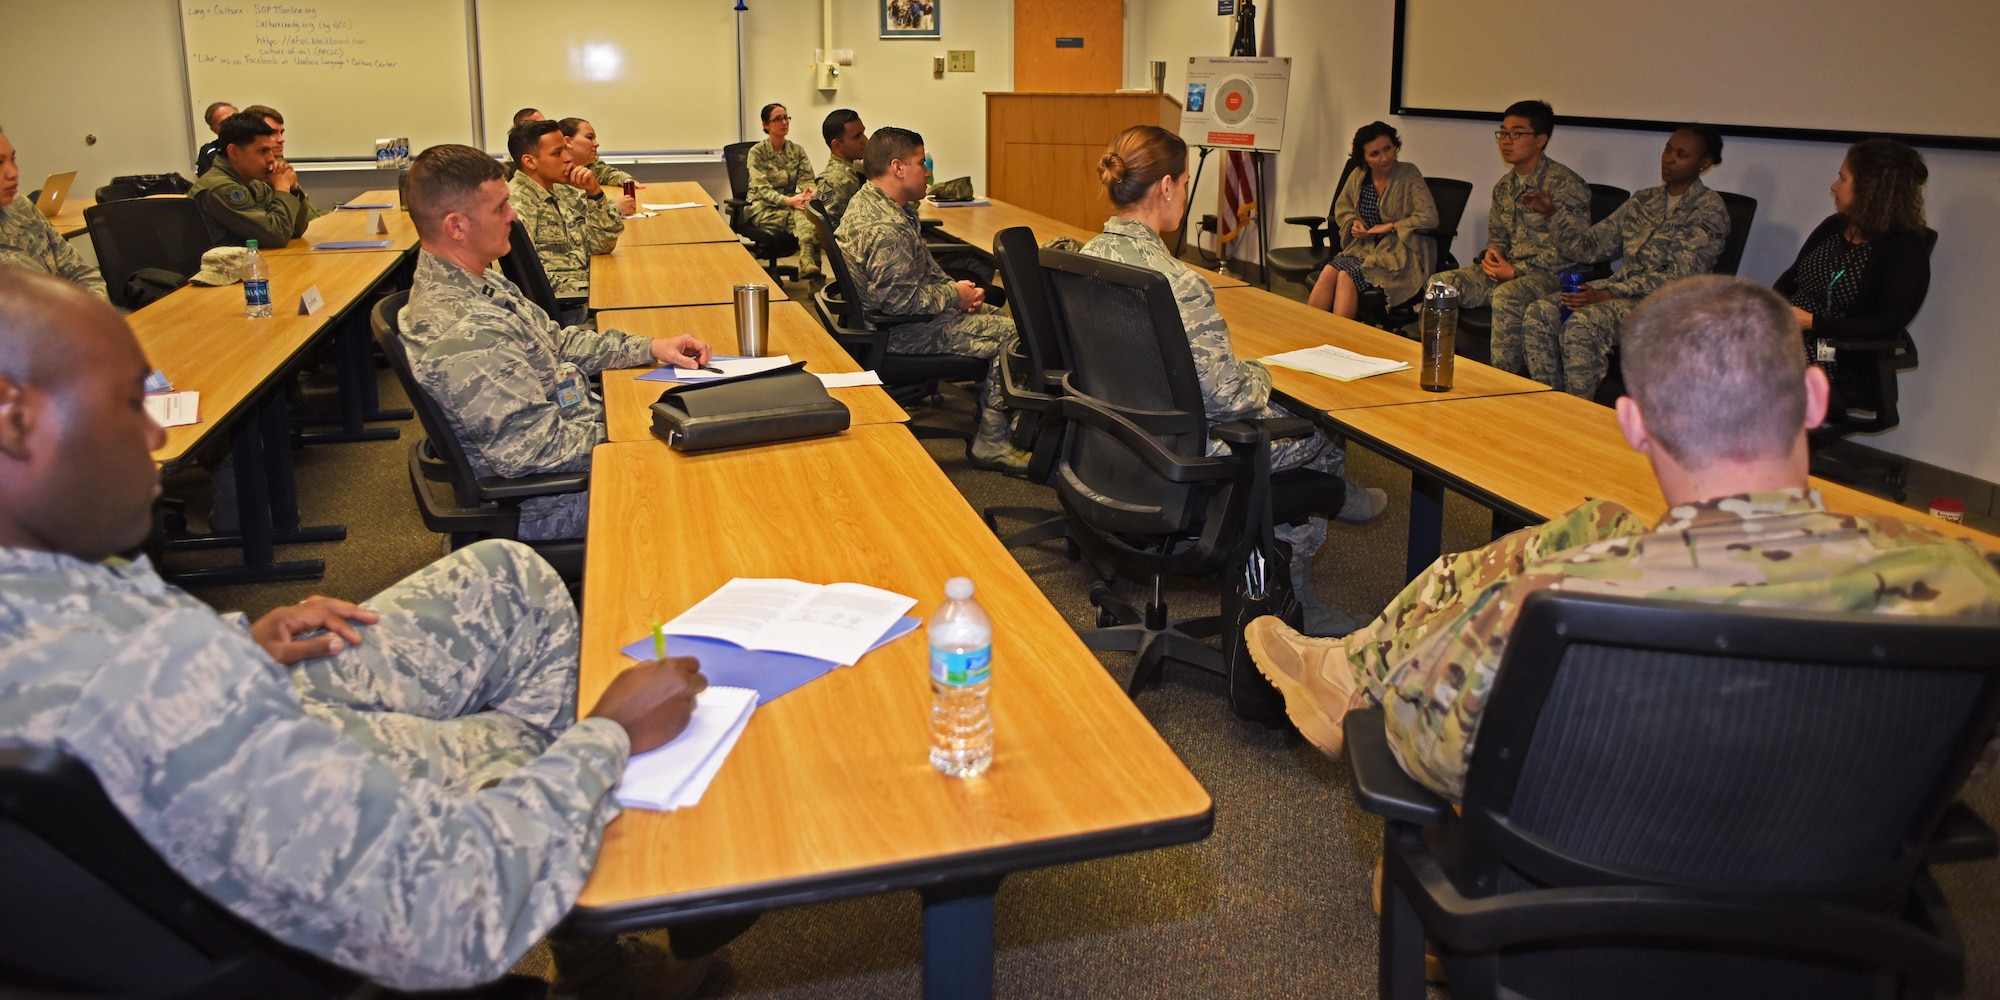 Airmen 1st Class Woo Jin Eum and Naomi Muhura, language and culture advisors at the United States Air Force Special Operations School, sit on a panel of language and culture experts during a course at Hurlburt Field, Fla., March 31, 2016. Eum and Muhura are in the Military Accessions Vital to the National Interest (MAVNI) program. They teach, interpret and translate their native languages as needed, enabling the Air Force Special Operations Command mission. (U.S. Air Force photo/Staff Sgt. Melanie Holochwost)